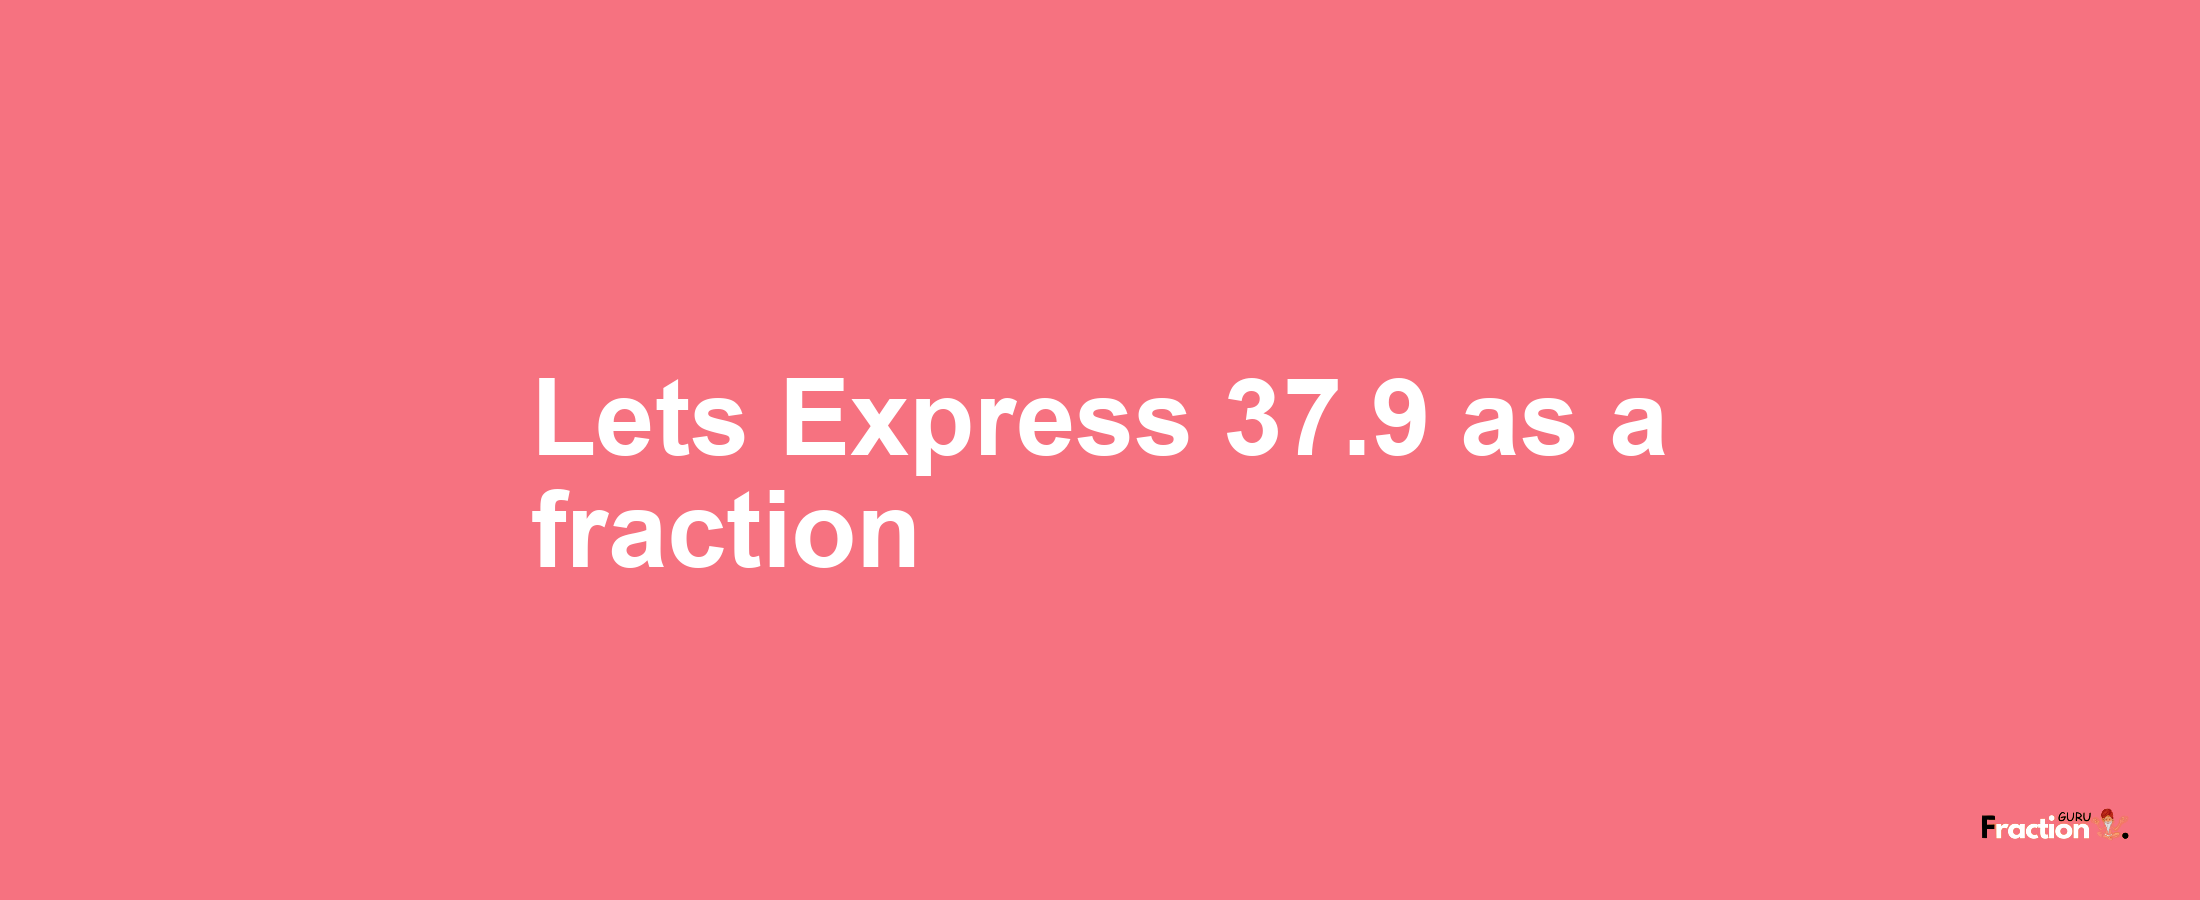 Lets Express 37.9 as afraction